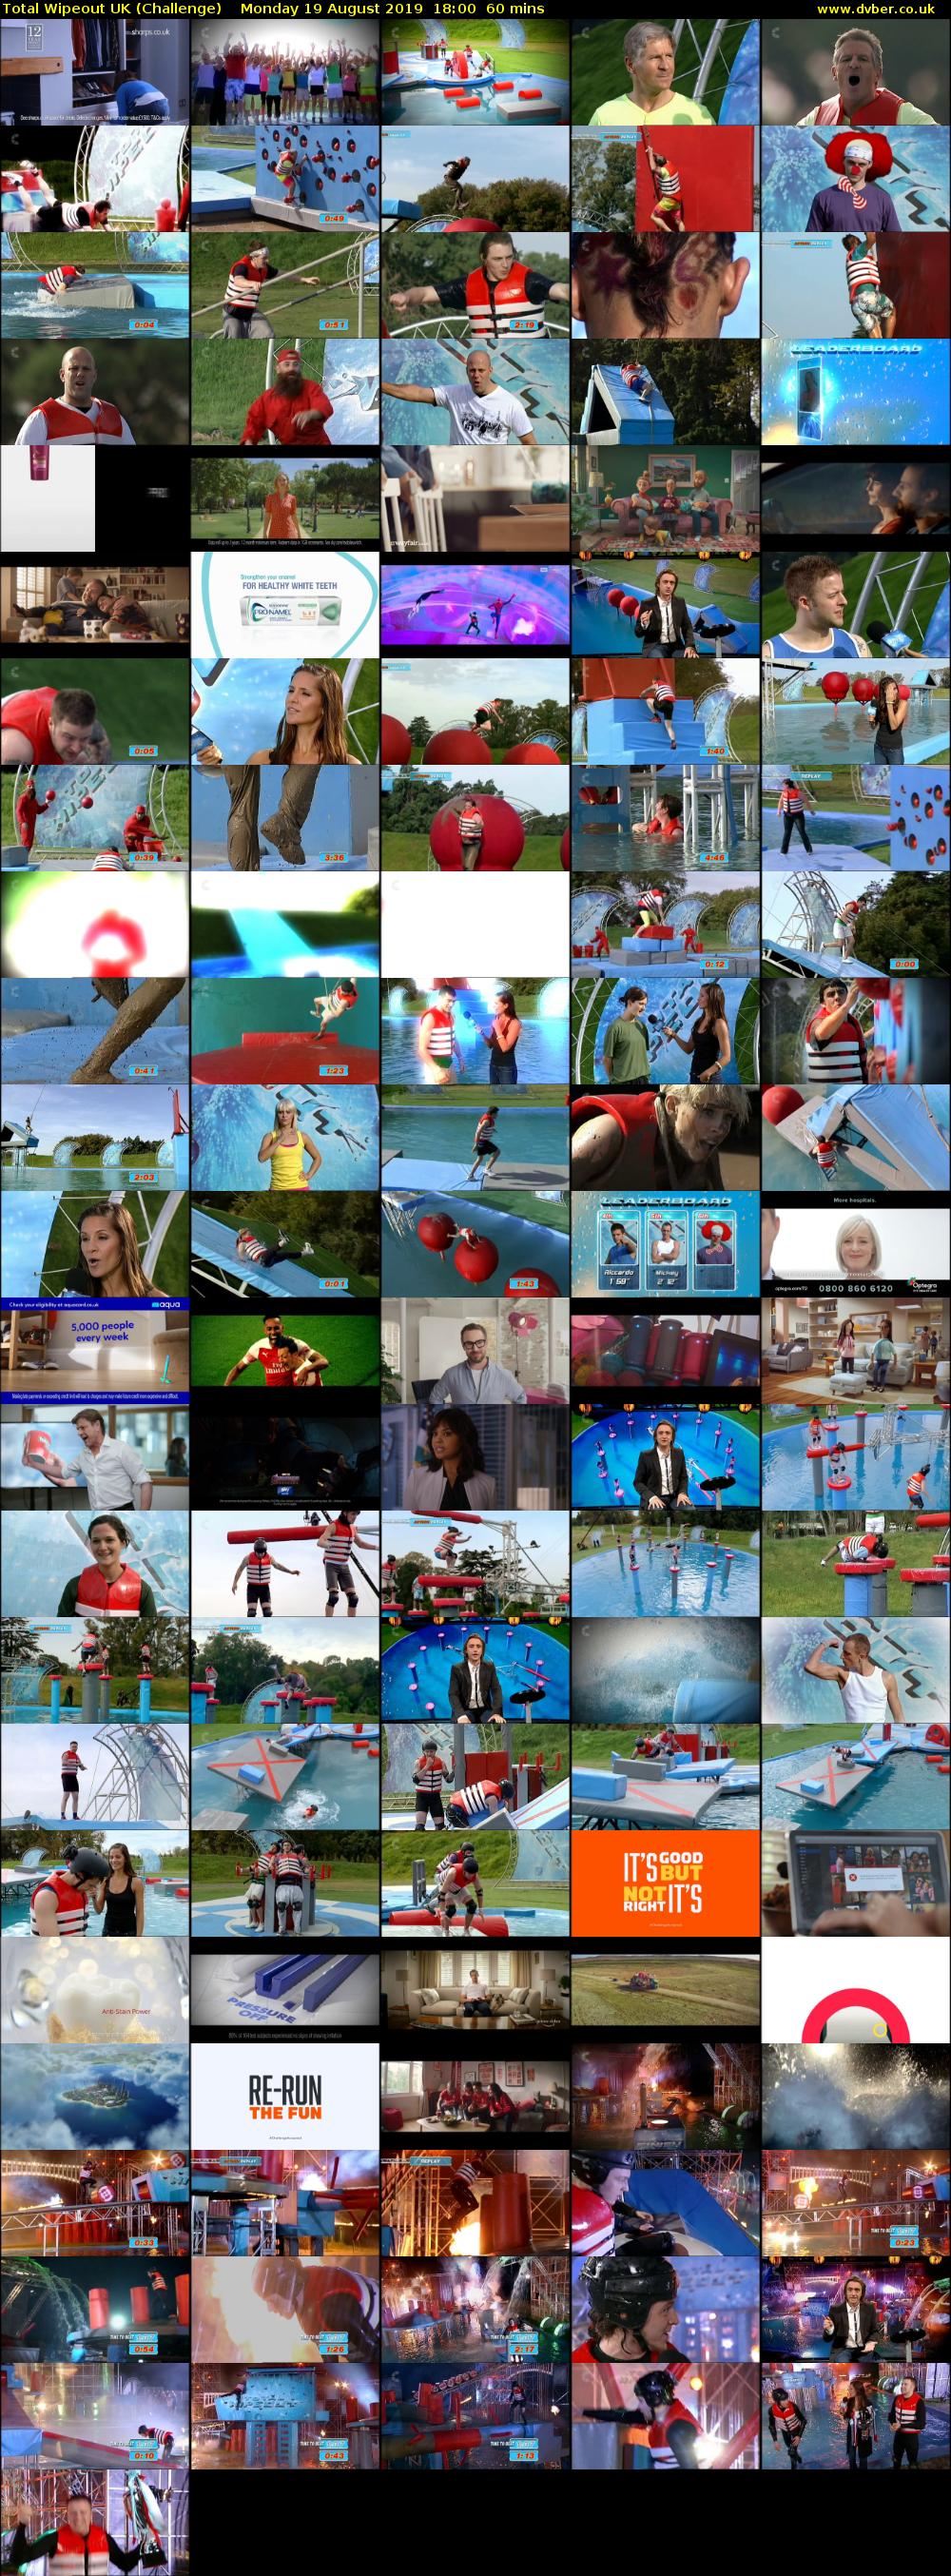 Total Wipeout UK (Challenge) Monday 19 August 2019 18:00 - 19:00